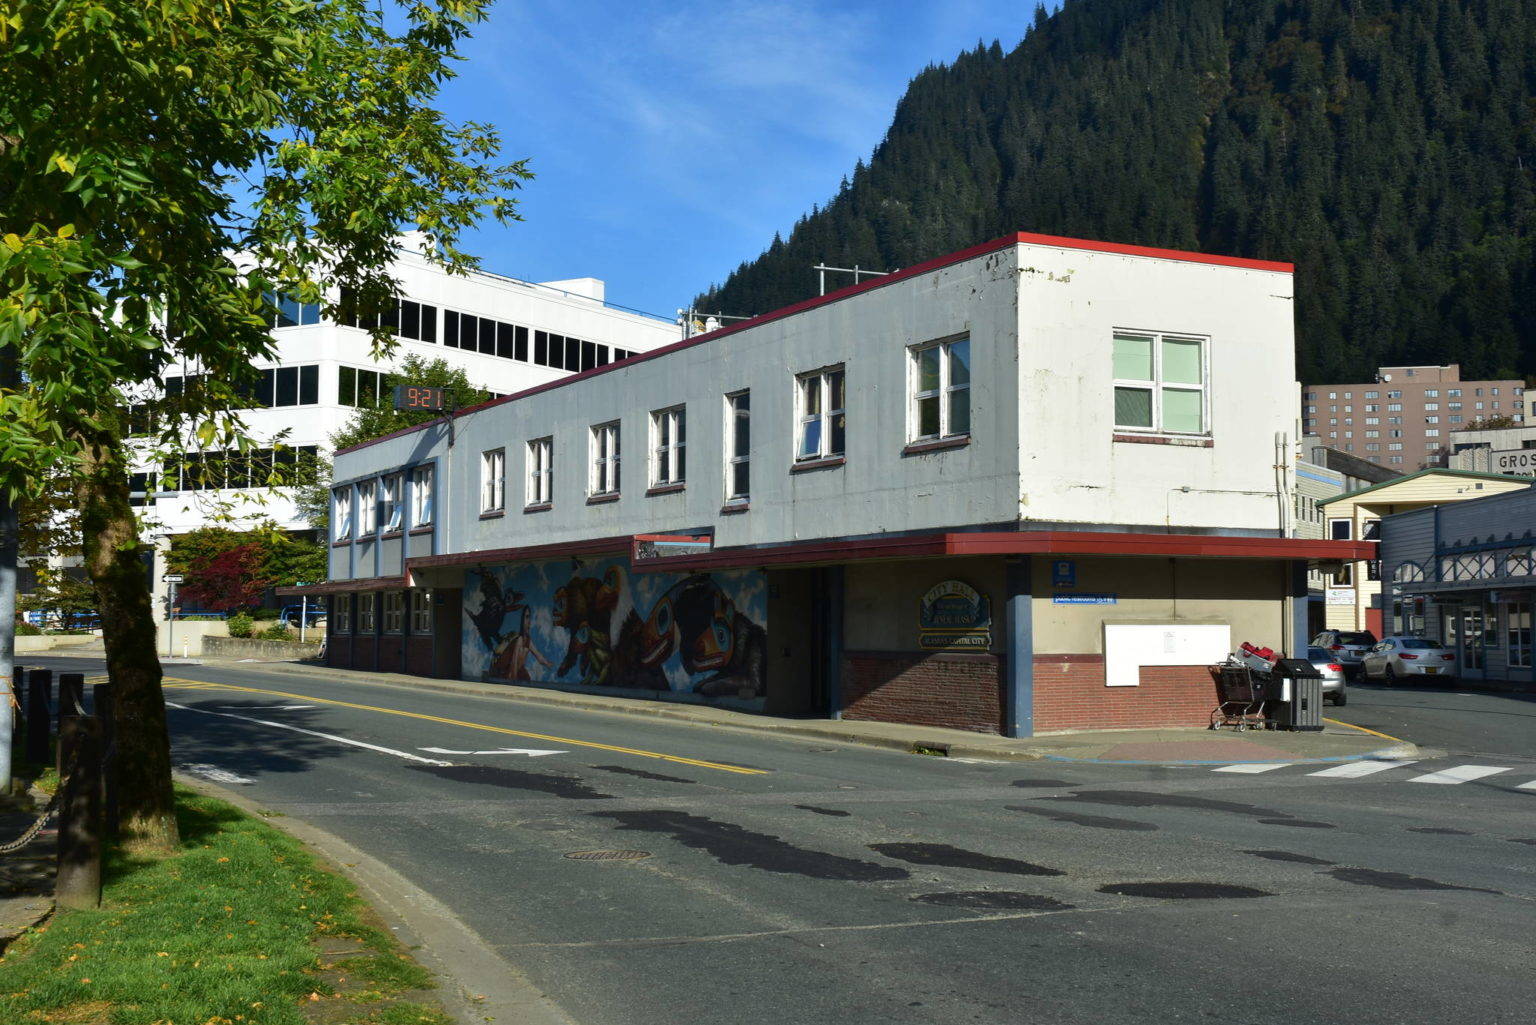 Juneau City Hall. On Thursday night, assembly members voted to add money to the Household and Individual Assistance programs and make the eligibility requirements more restrictive. (Peter Segall / Juneau Empire)